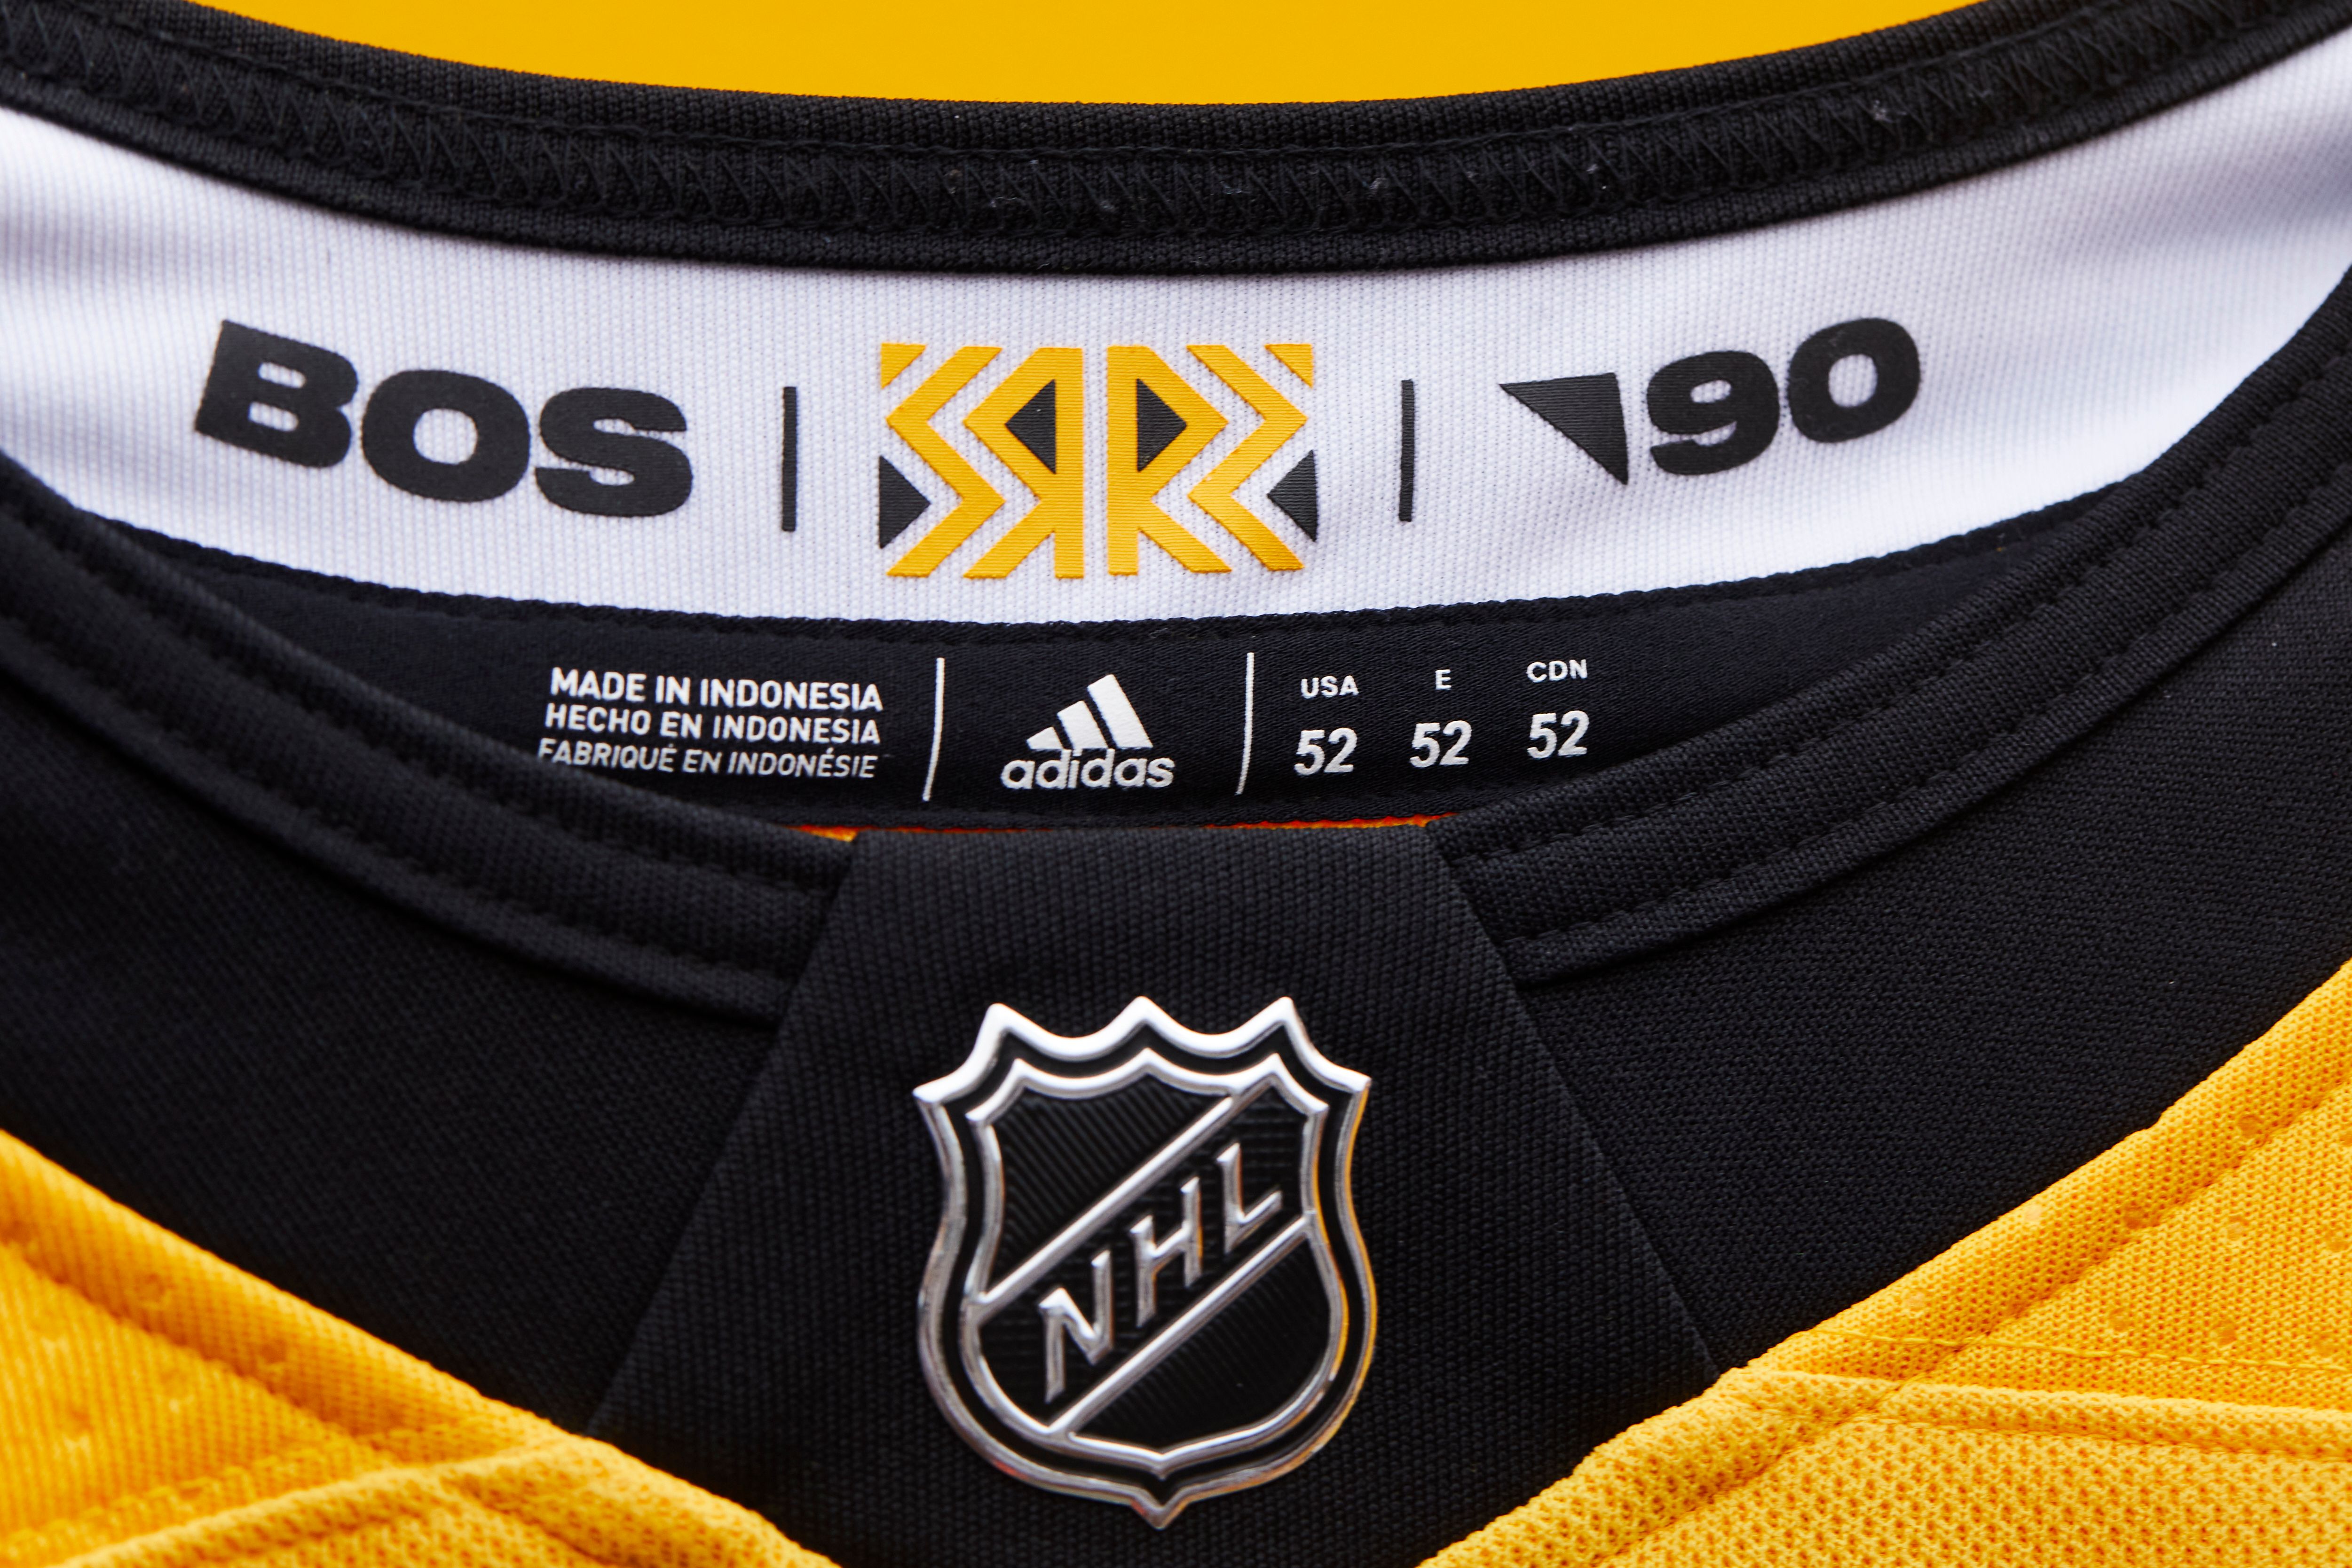 Boston Bruins unveil new jersey: How have Boston's jerseys changed